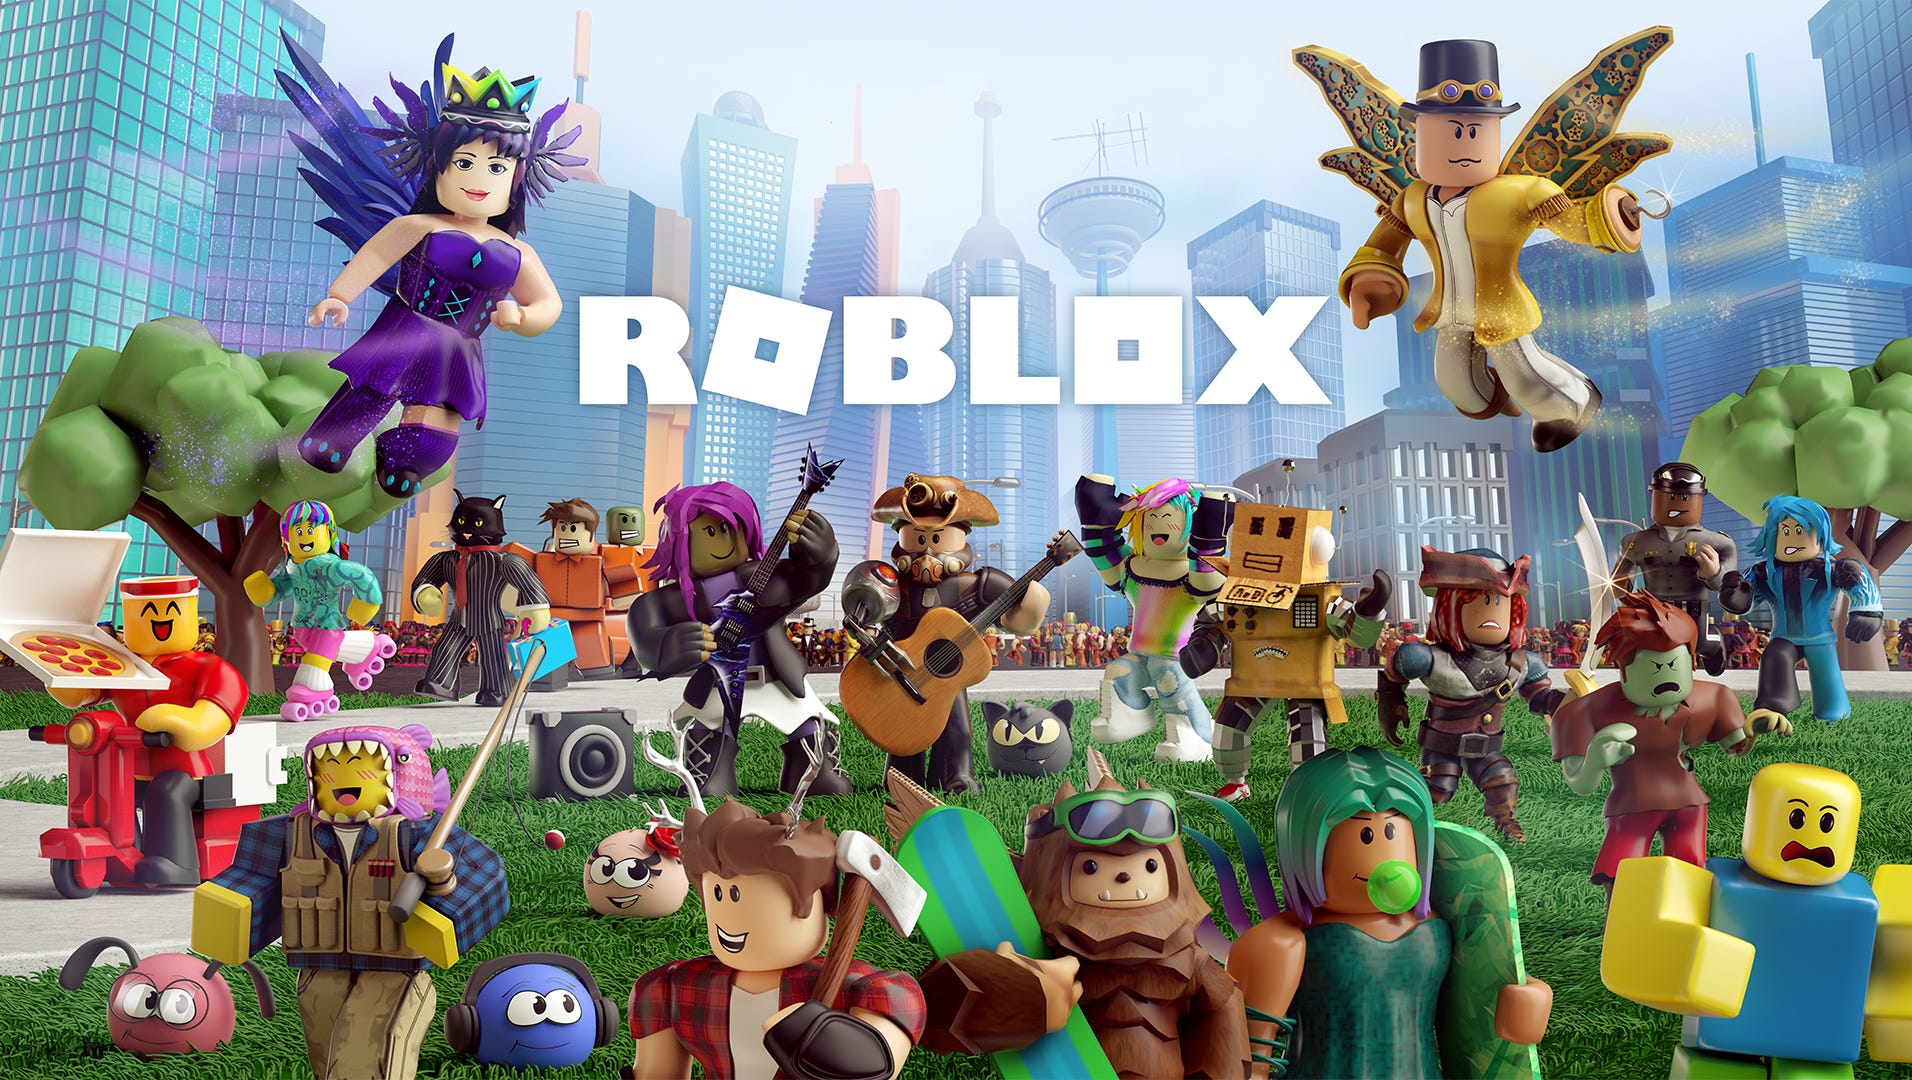 Roblox Kids Game Shows Character Being Sexually Violated - roblox assault news